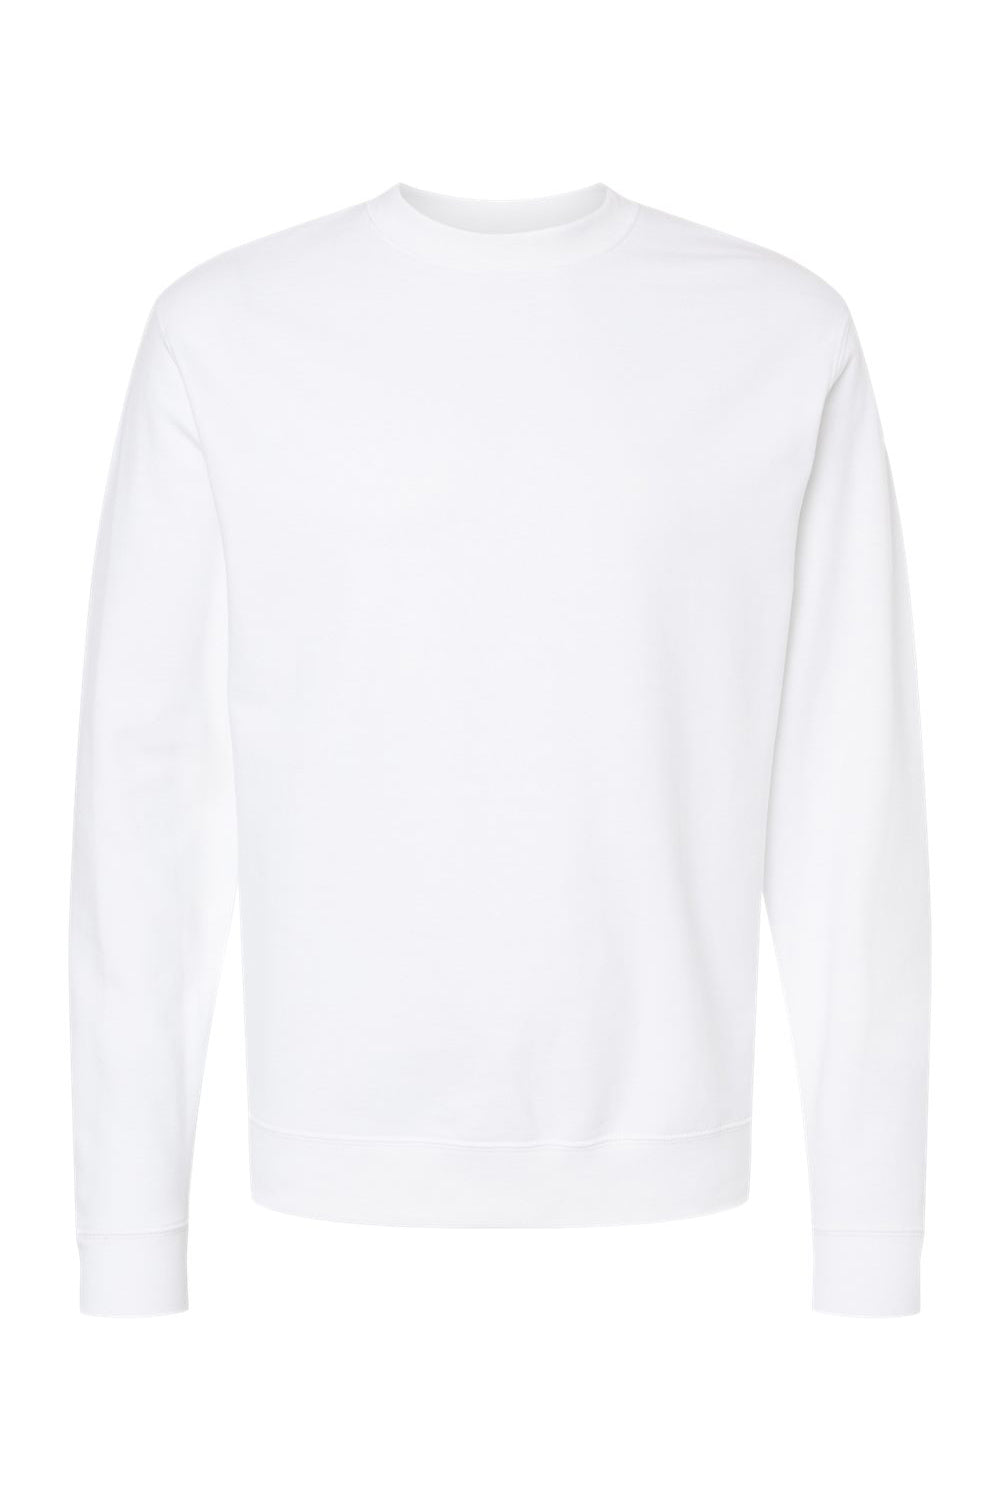 Independent Trading Co. SS3000 Mens Crewneck Sweatshirt White Flat Front